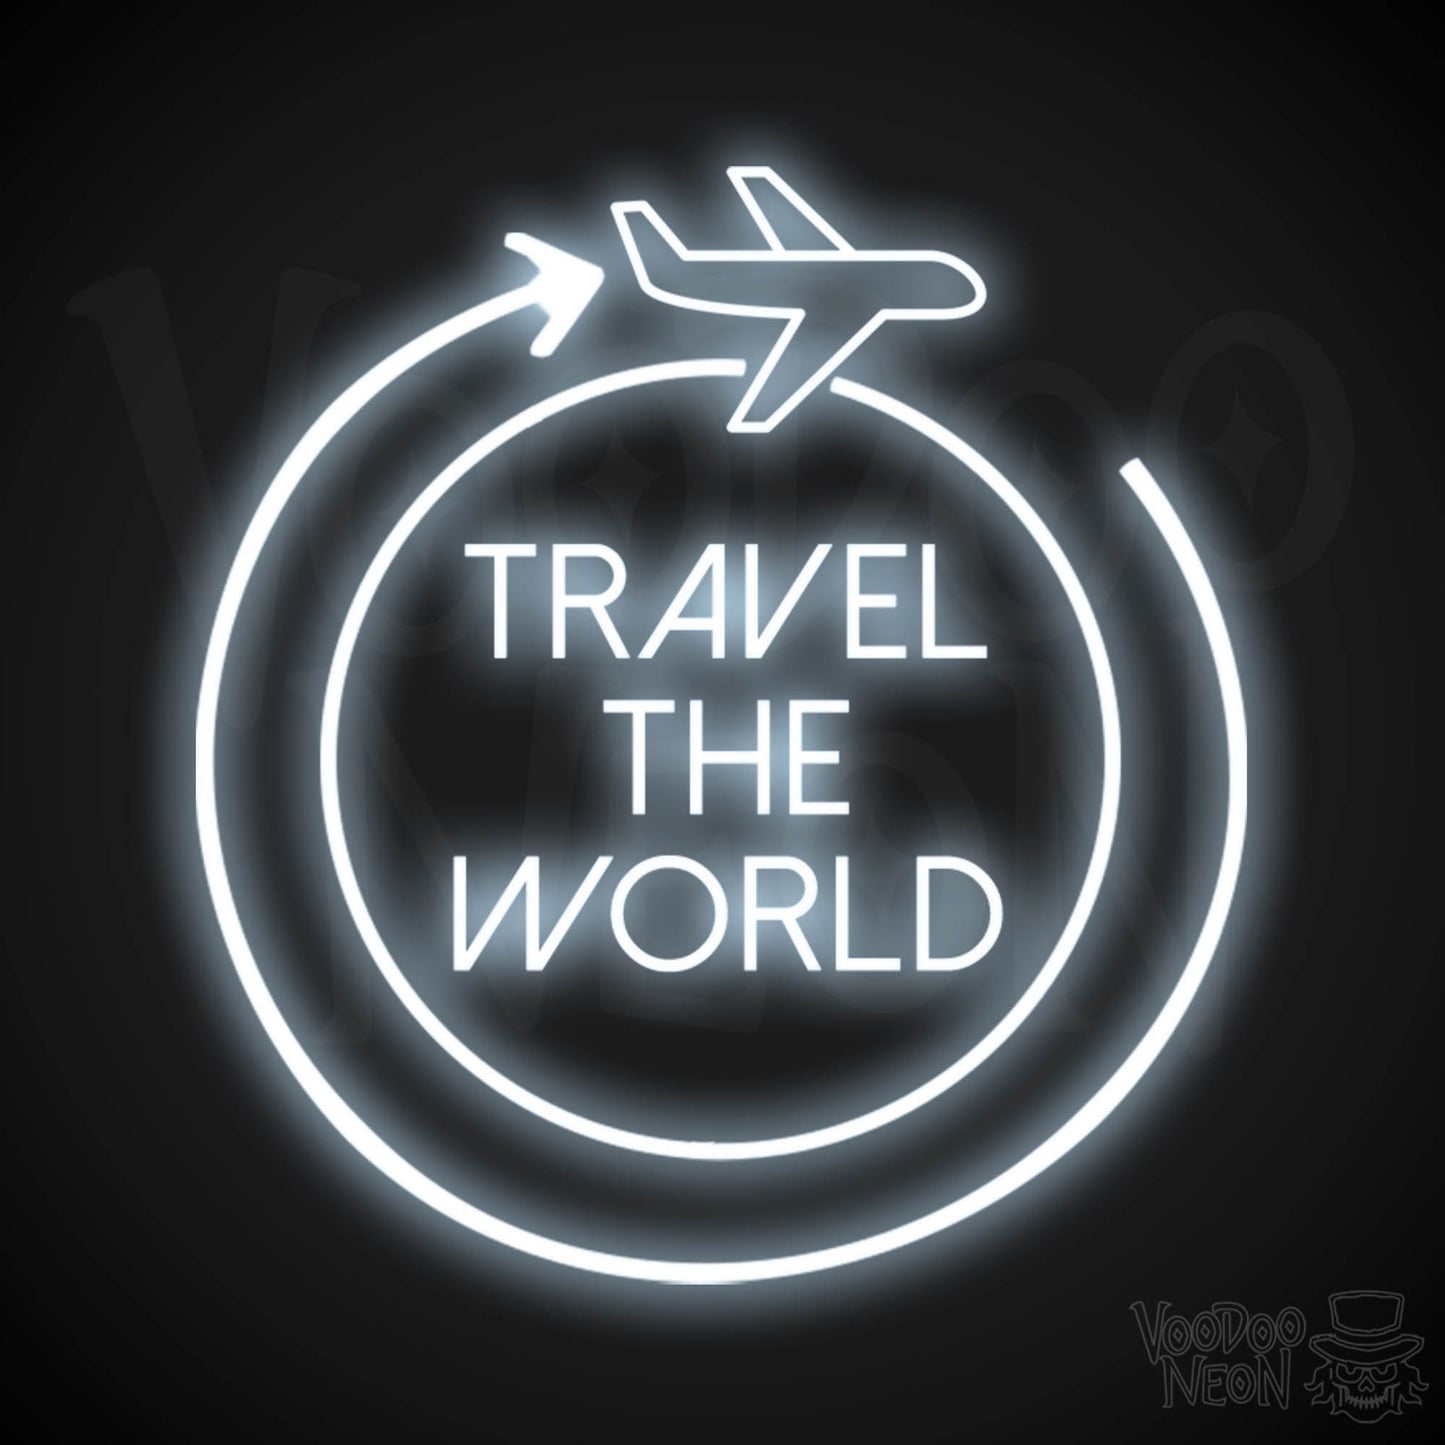 Let's Travel The World Neon Sign - LED Neon Wall Art - Color Cool White